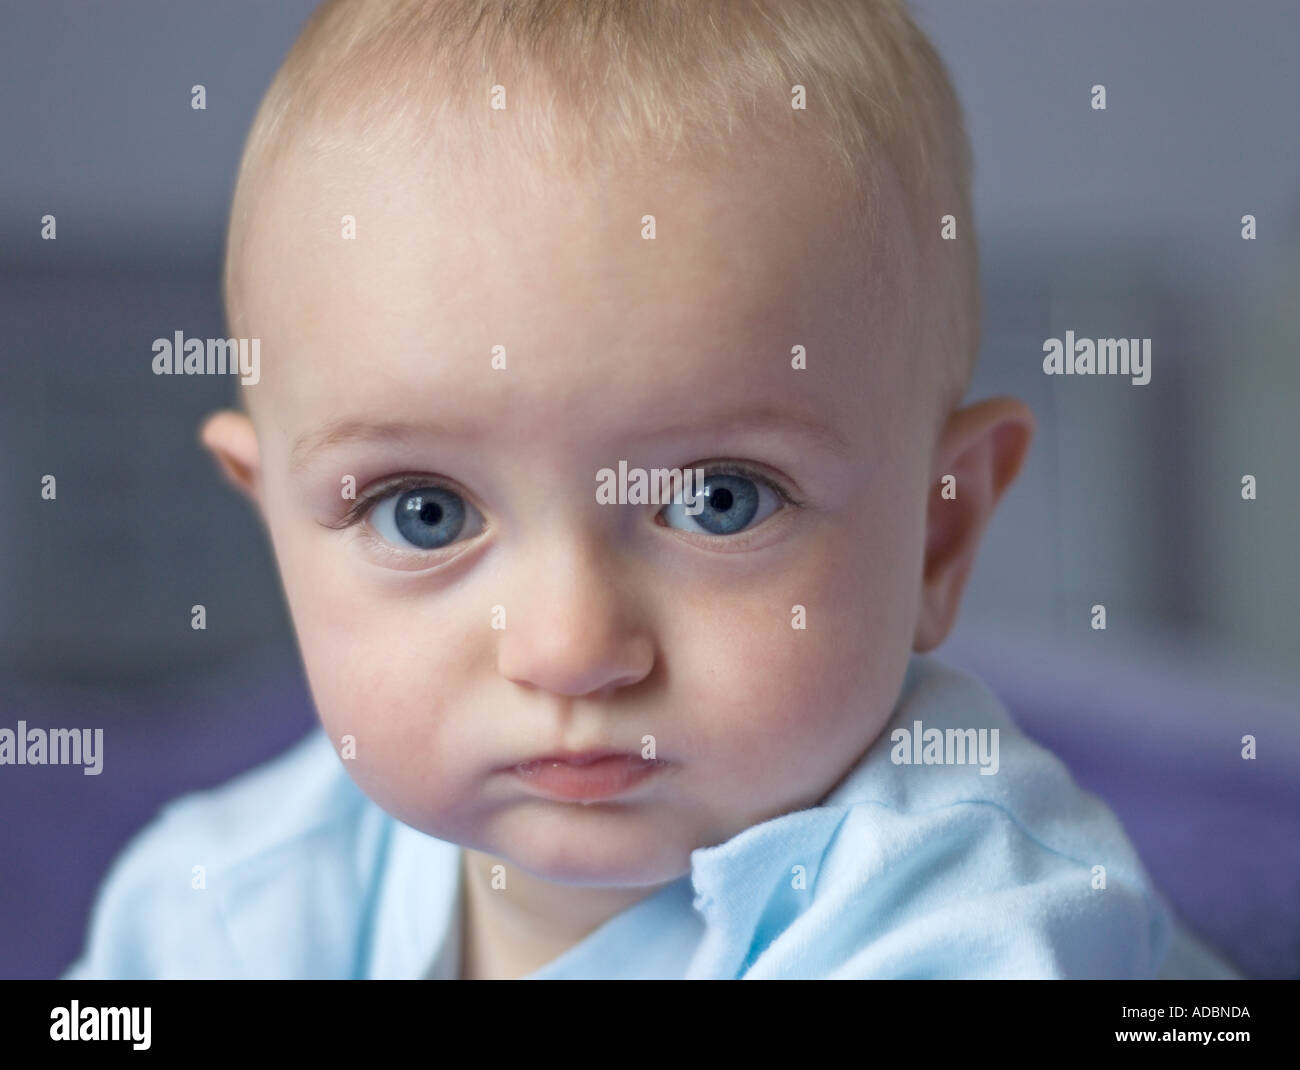 10 month old baby boy with blue eyes Stock Photo - Alamy